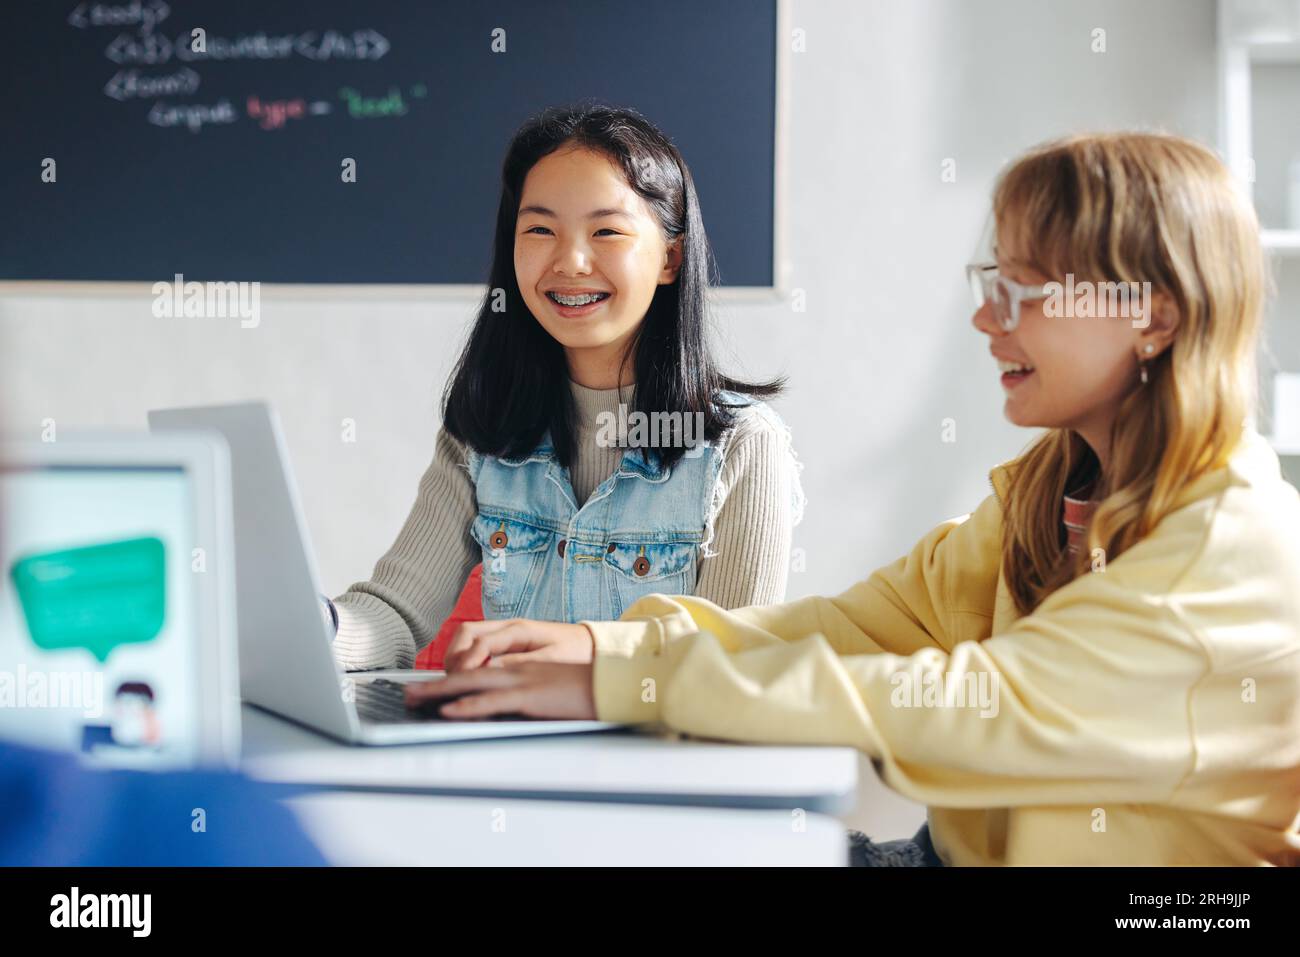 Elementary school students learning coding and computer programming in a classroom. Two young girls smiling as they sit next to each other, using a la Stock Photo